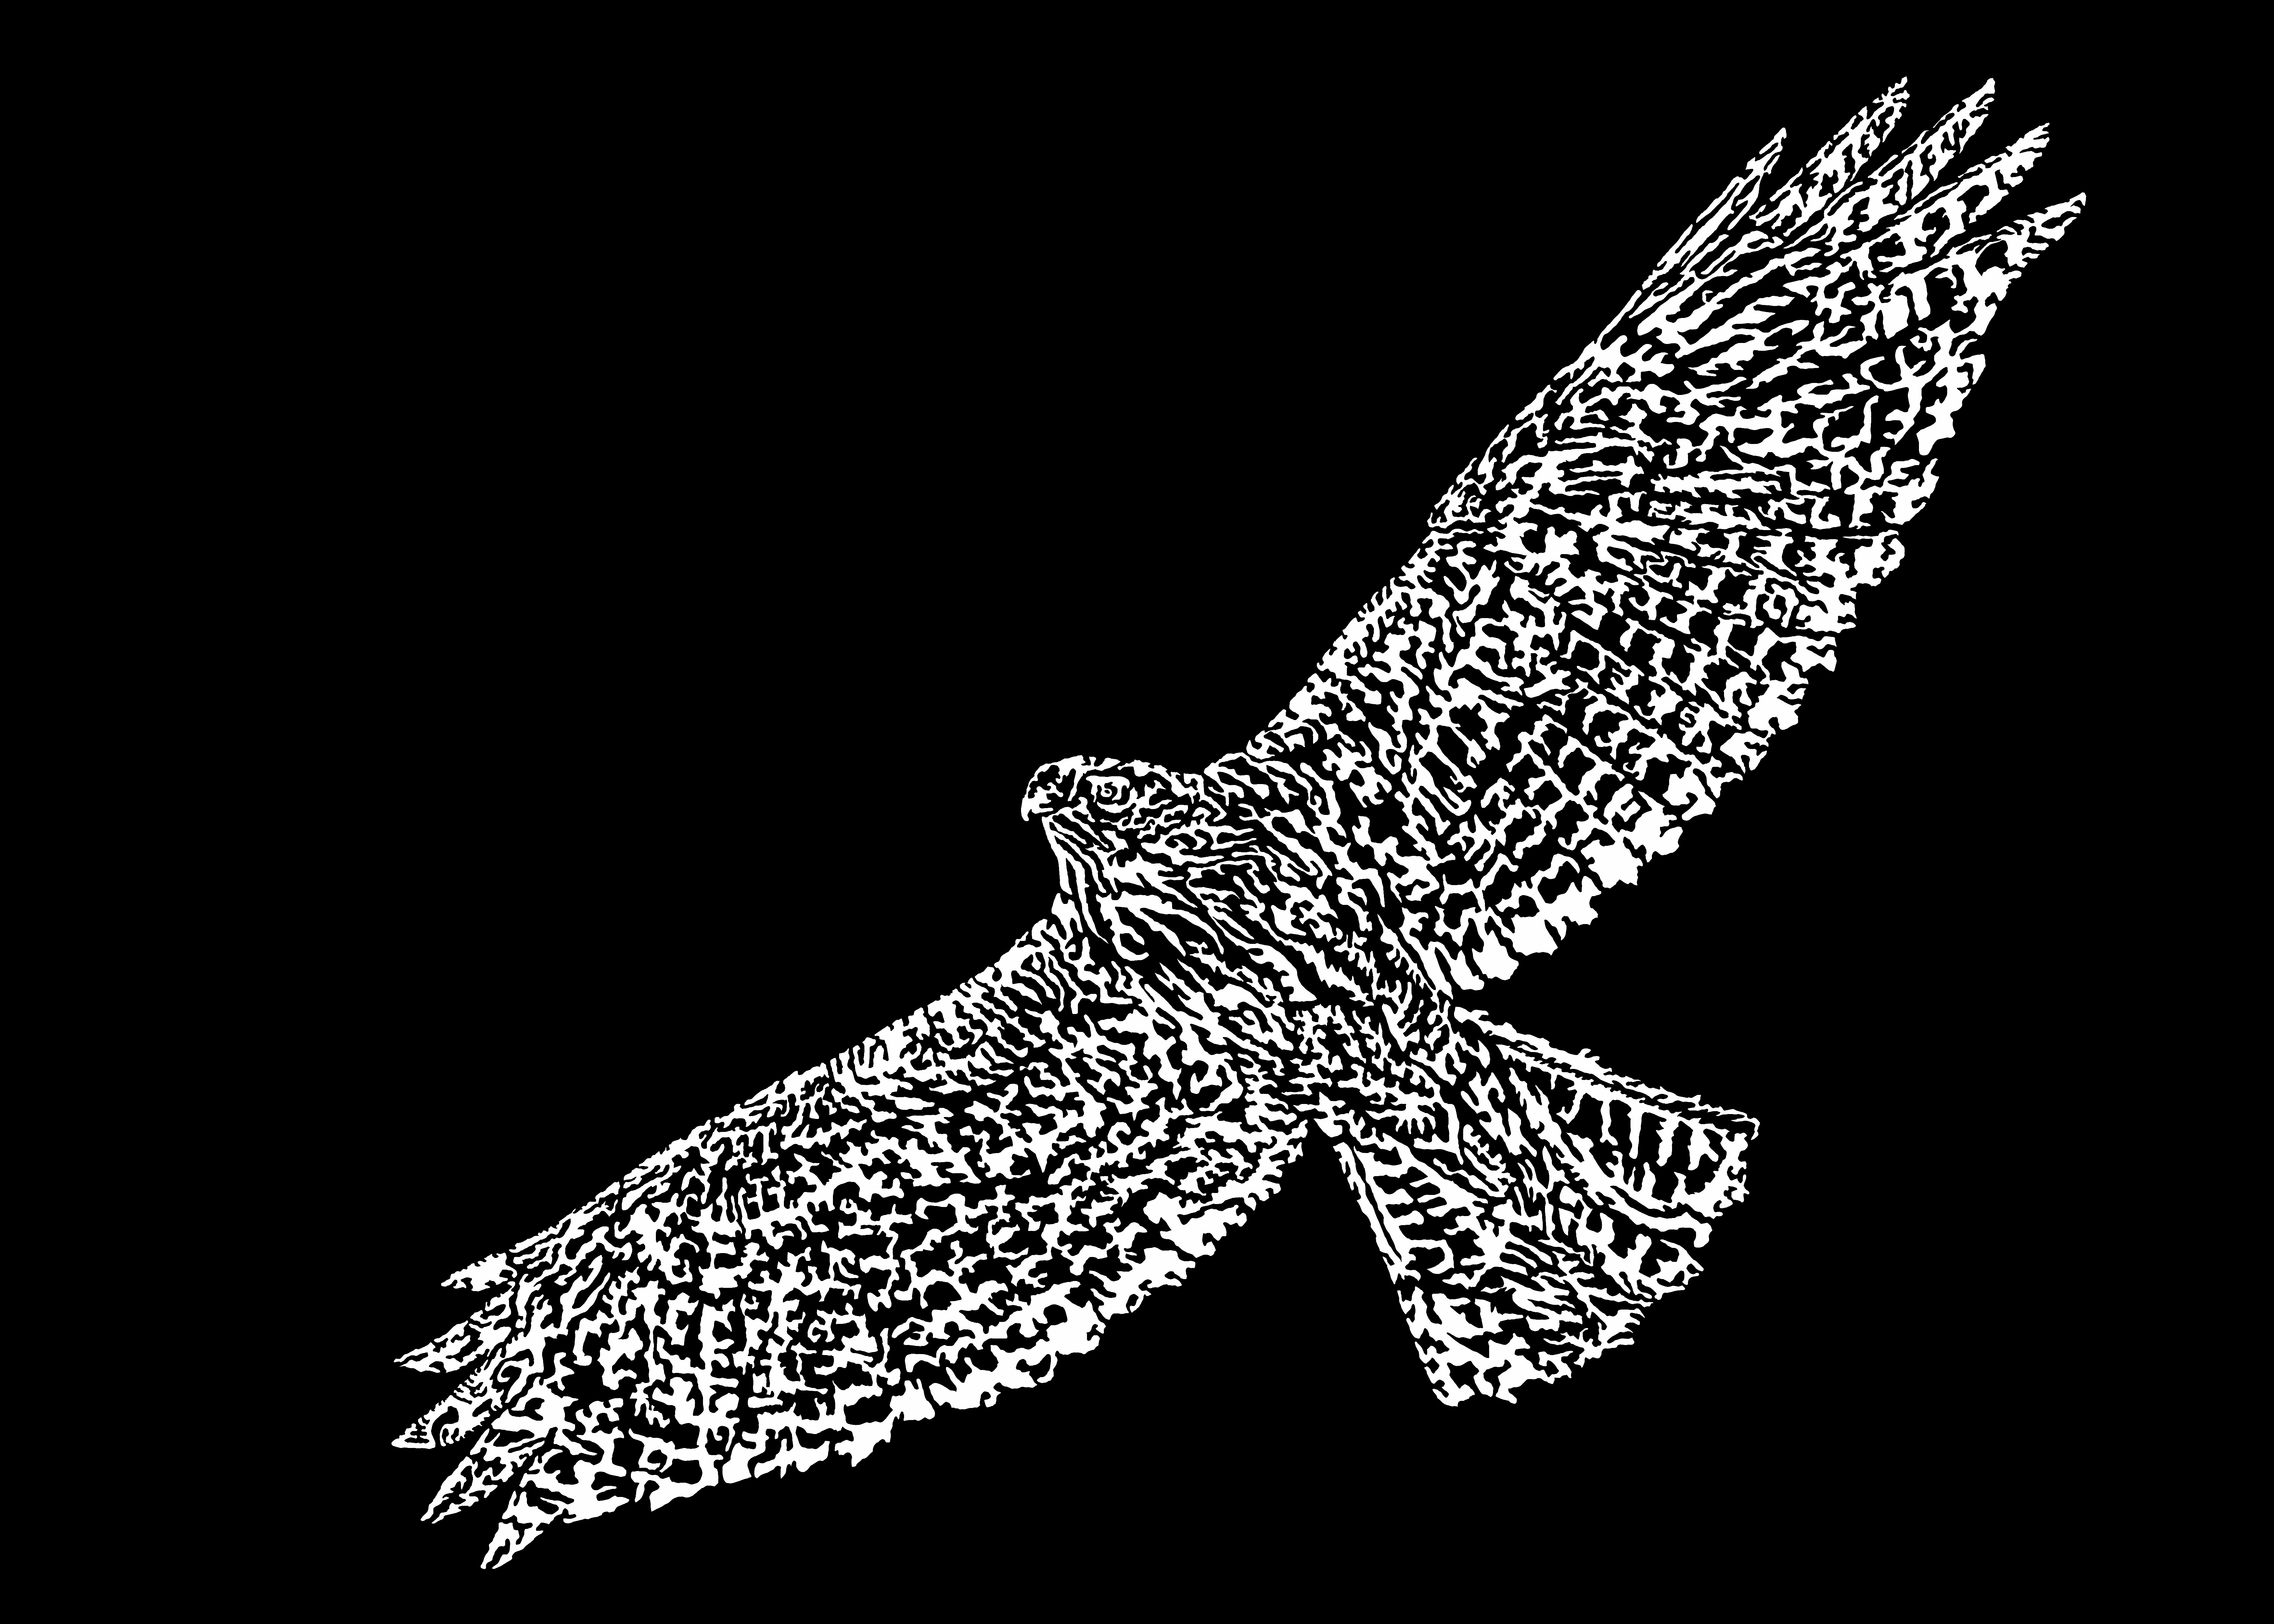 Digital drawing of redtail hawk in black and white